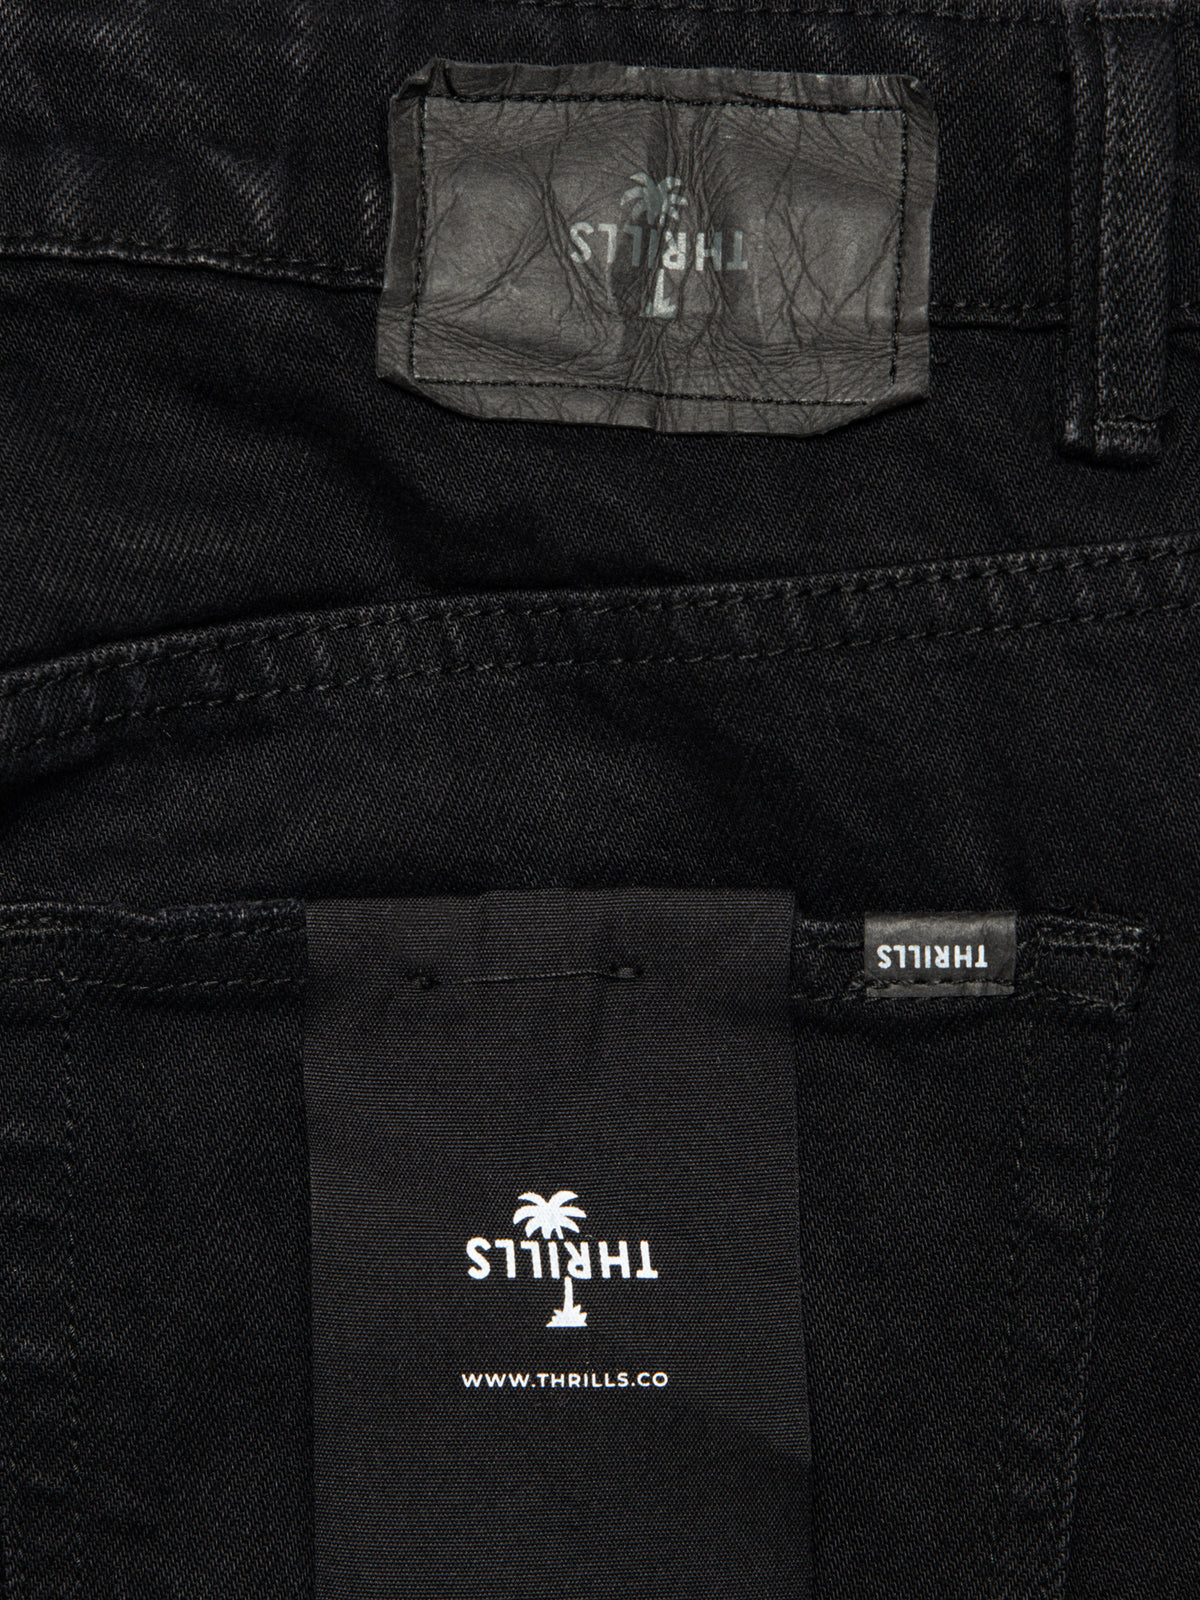 Chopped Jeans in Black Rinse